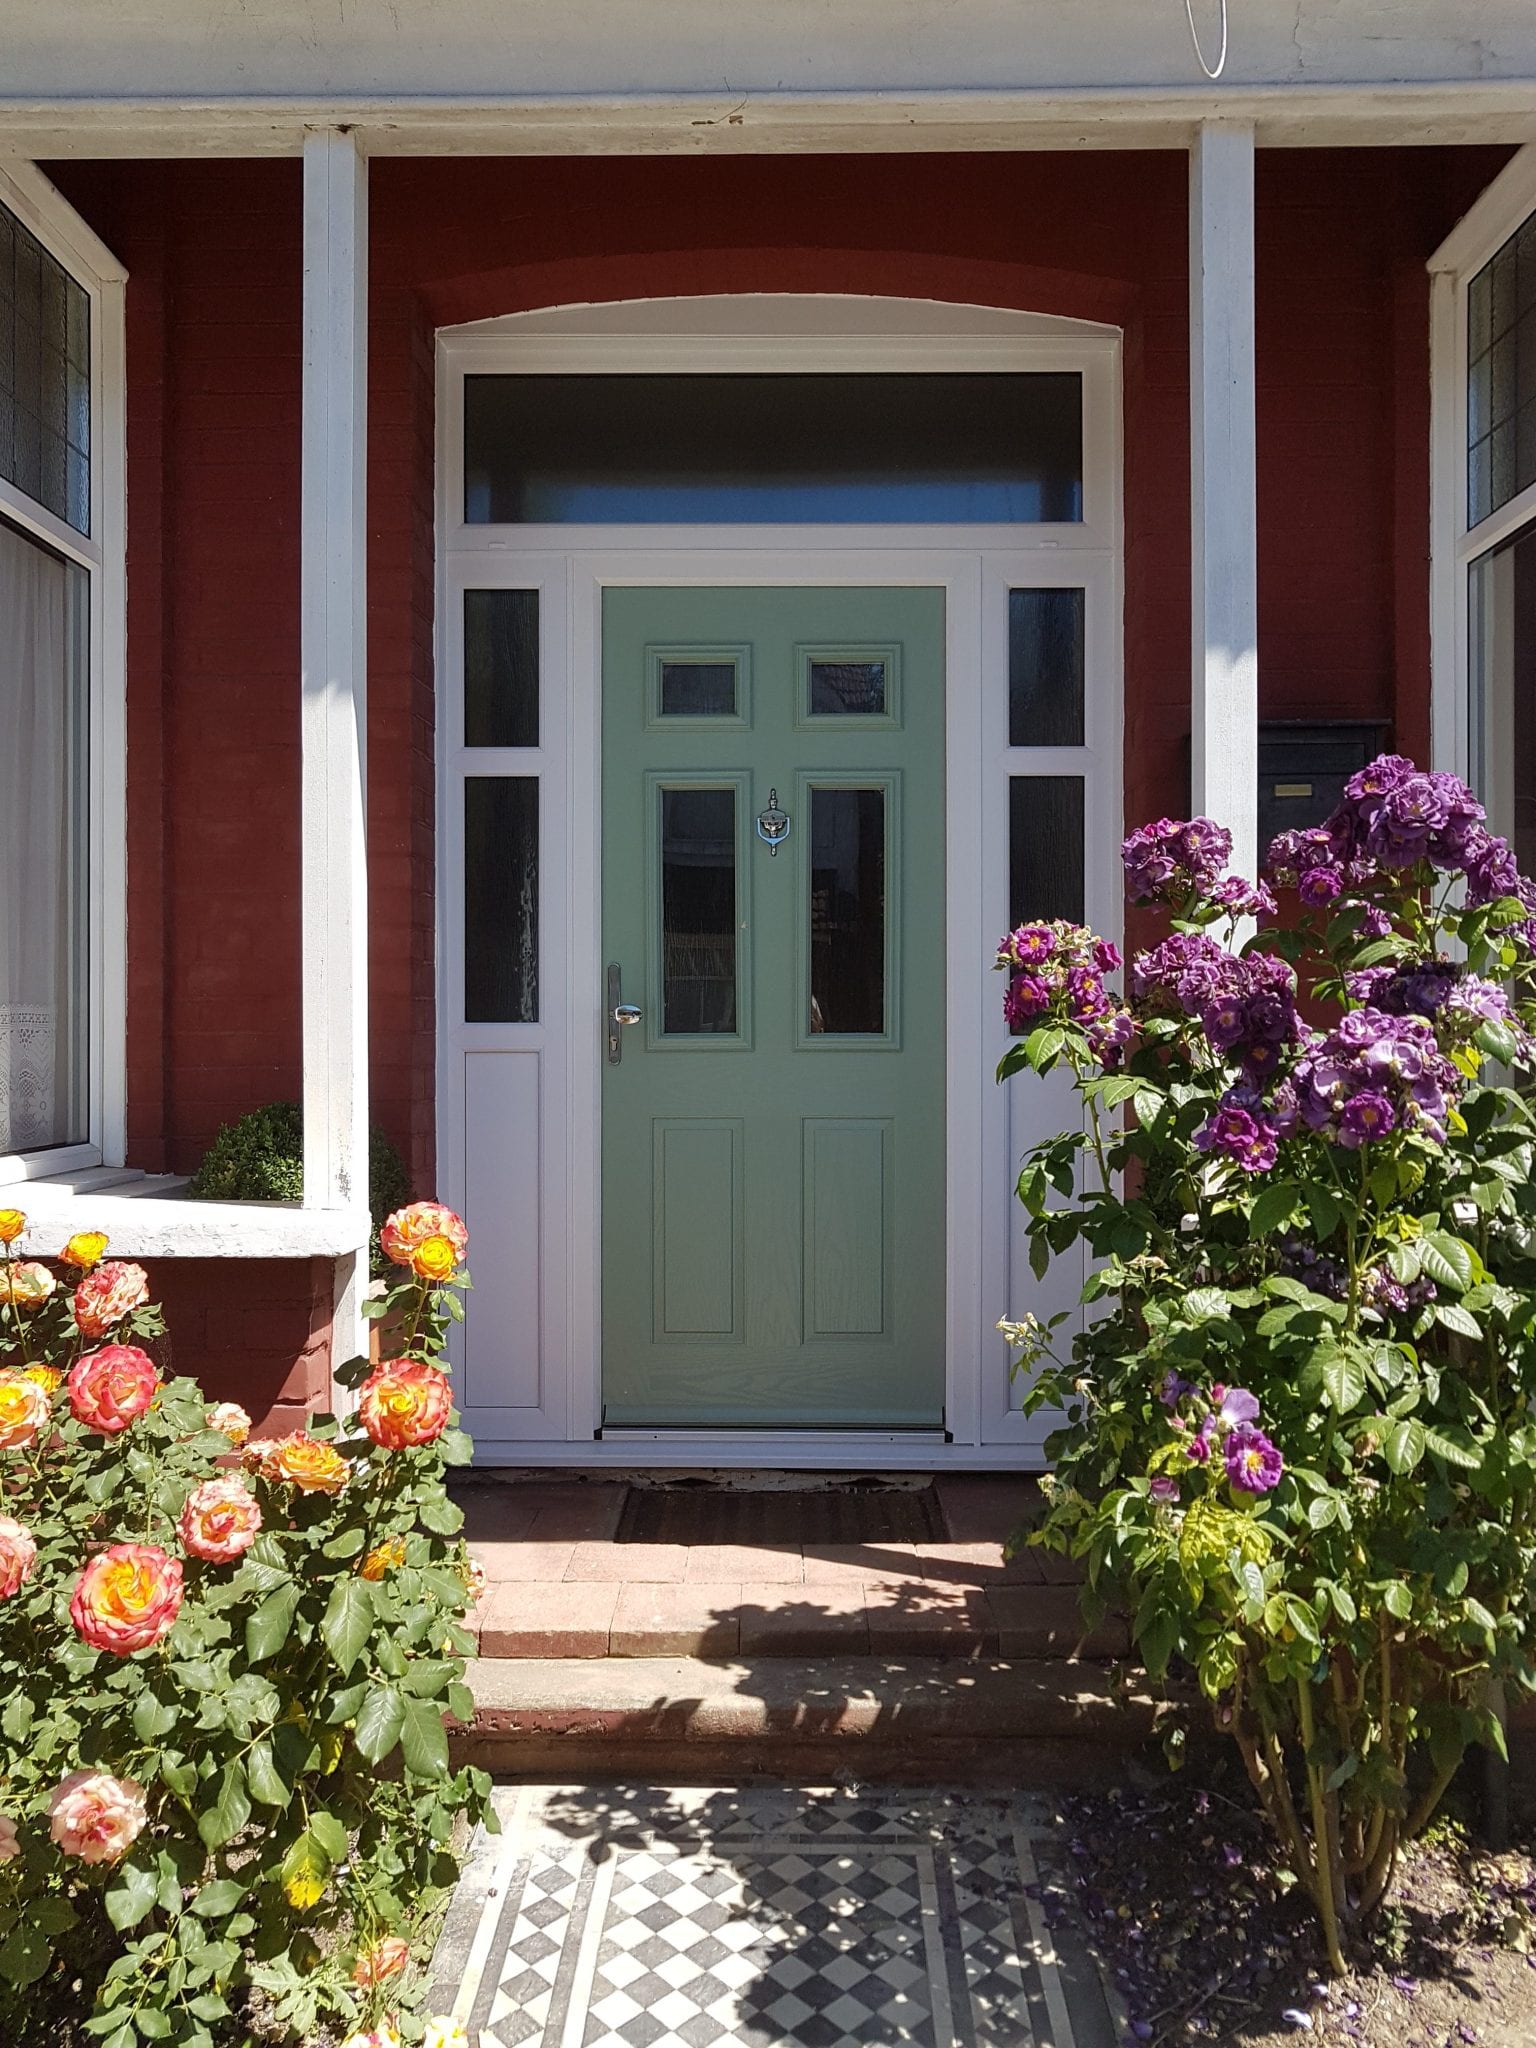 How Much Are Composite Doors?